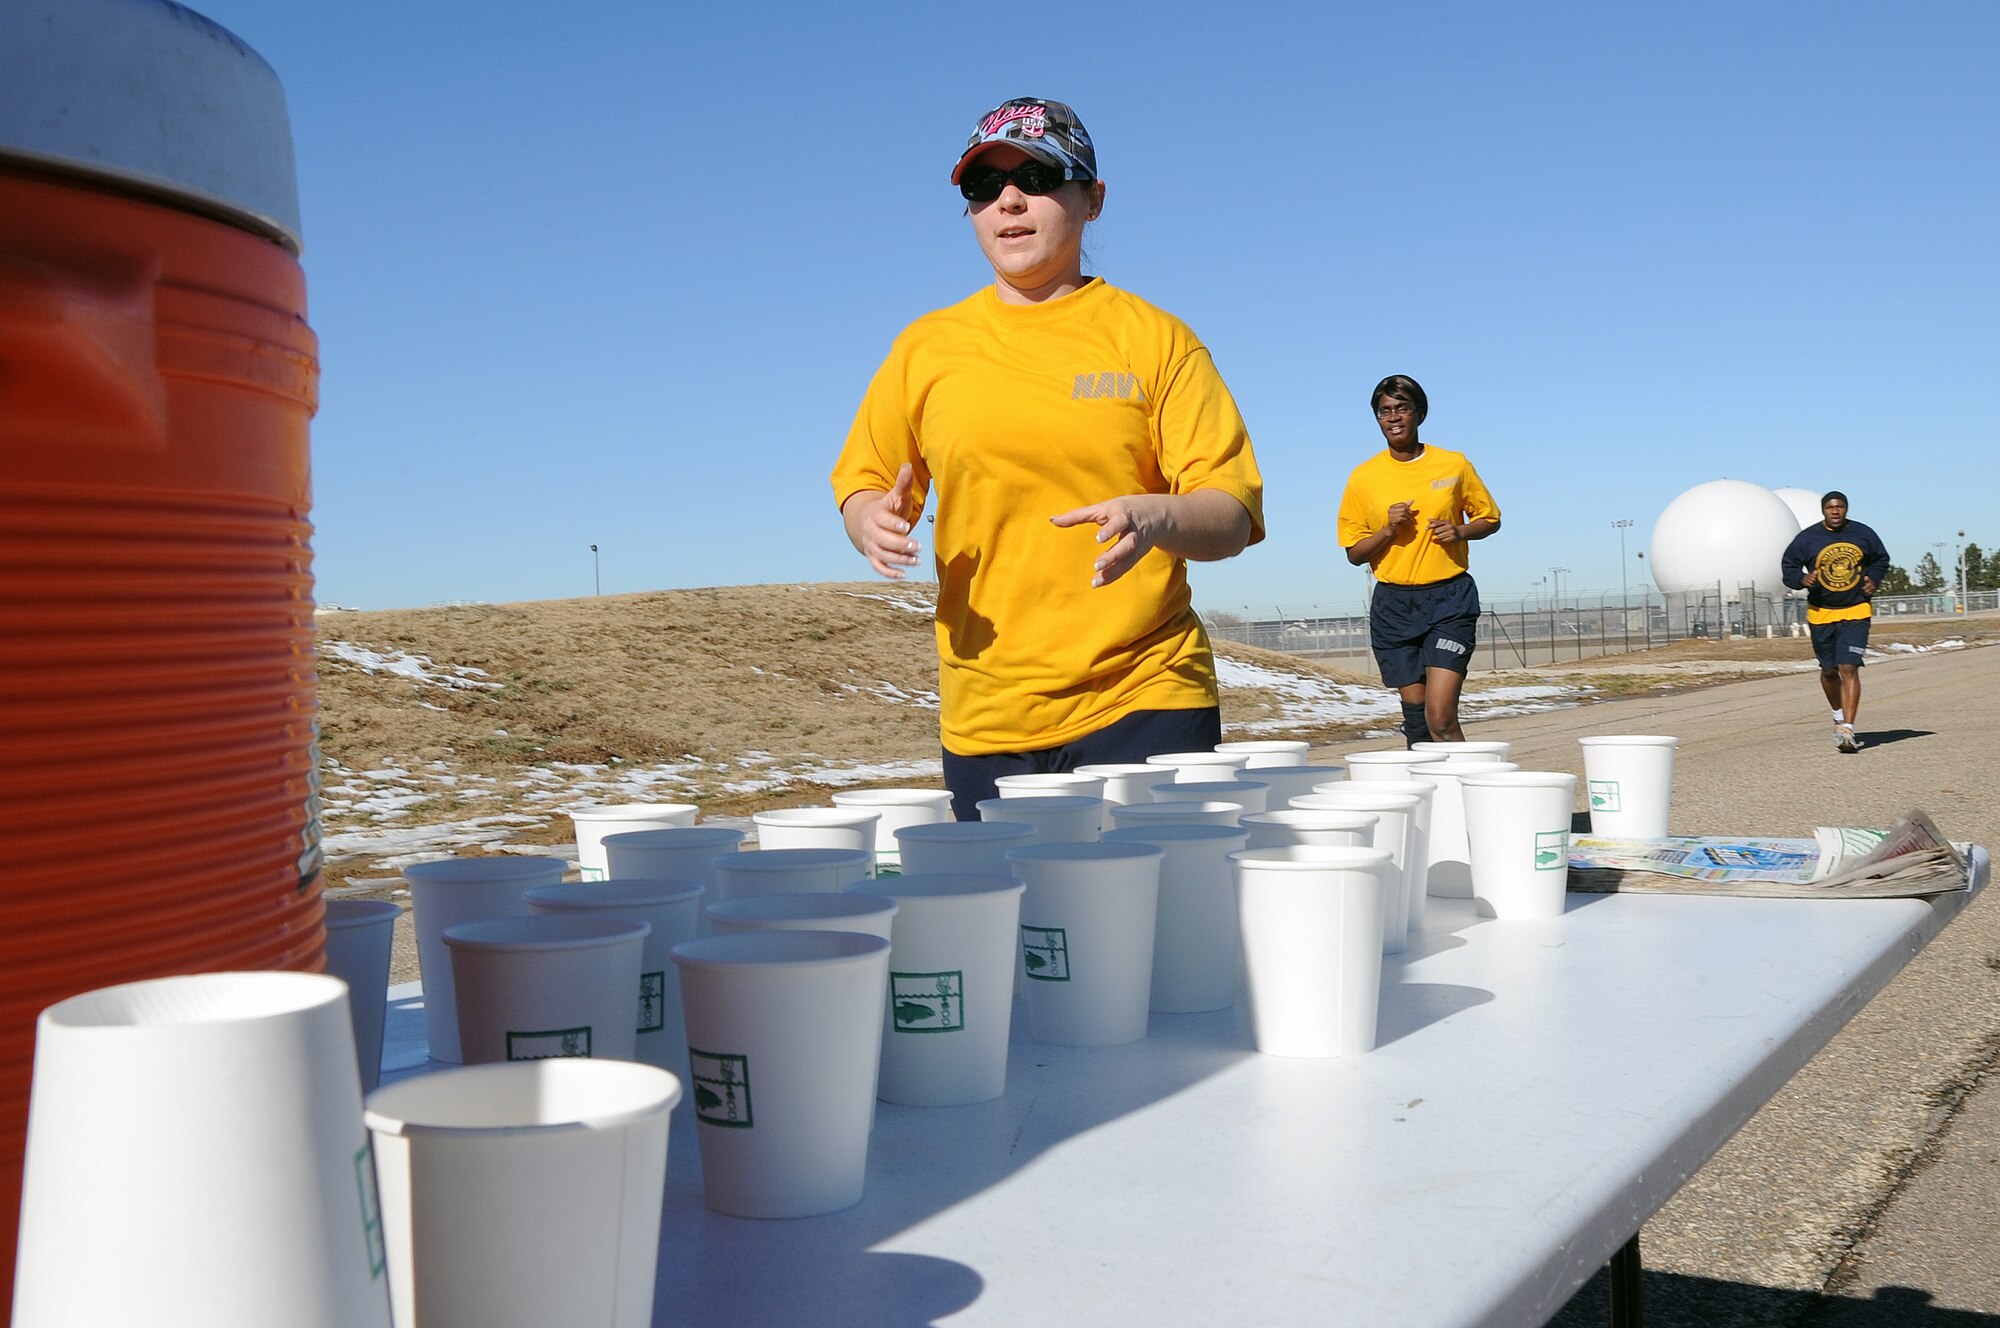 BUCKLEY AIR FORCE BASE, Colo. -- Navy servicemembers stop to get a drink of water during the annual Turkey Trot Nov. 18. A large number of servicemembers and civilians particpate in the Annual Turkey Trot. (U.S. Air Force photo by Airman First Class Marcy Glass)